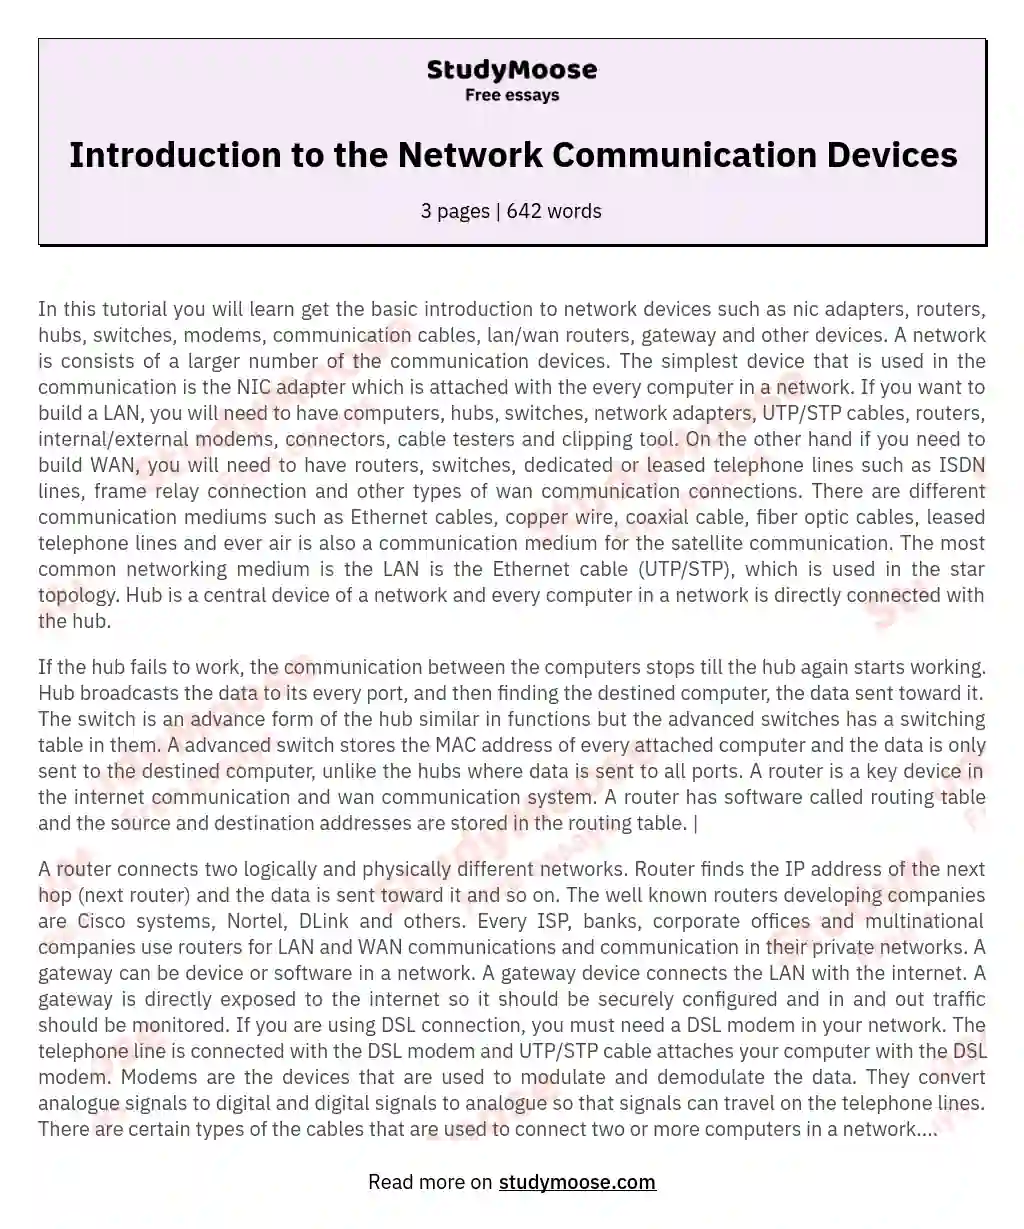 Introduction to the Network Communication Devices essay